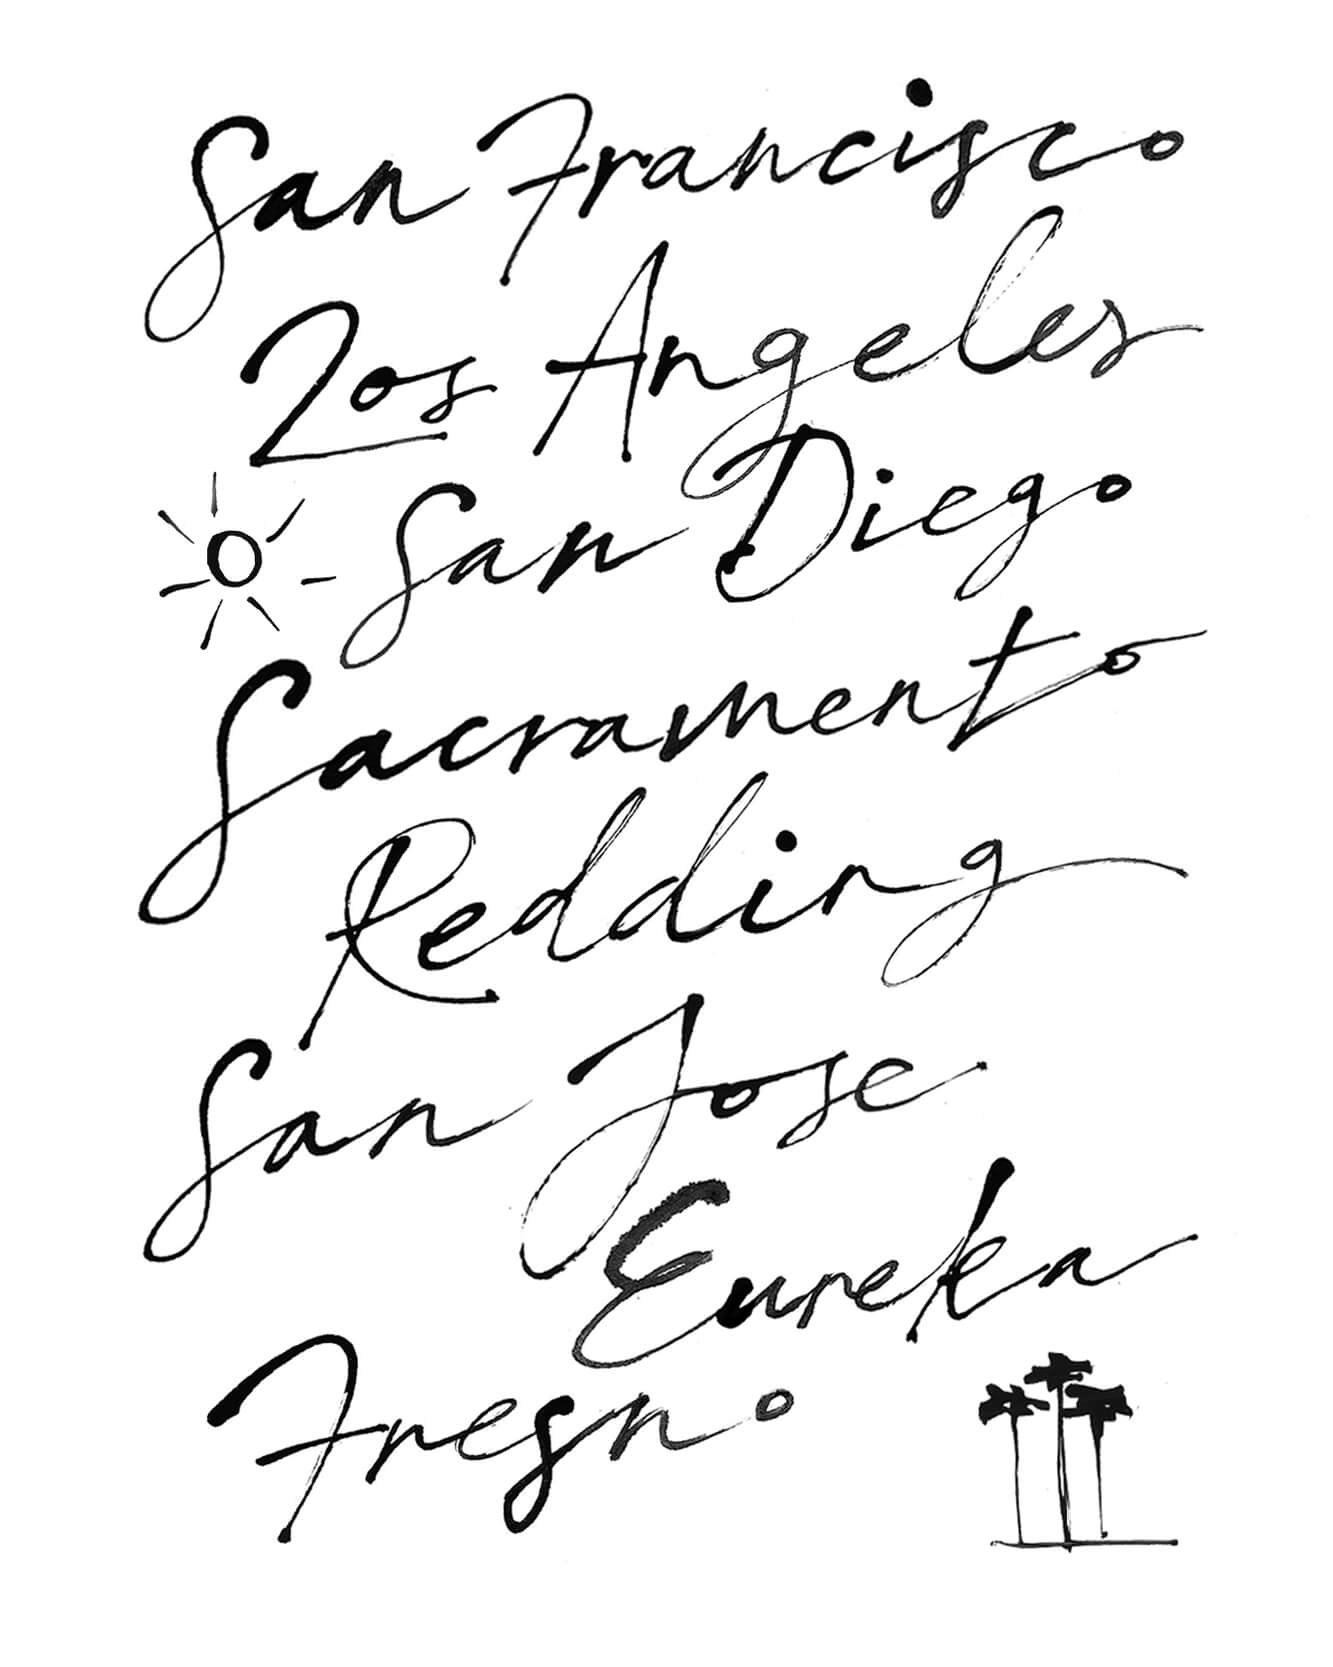 Hand drawn lettering of locations in California, for a hand drawn illustrated map, simple inky line lettering and drawing. Taken from an illustrated map of the State of California.